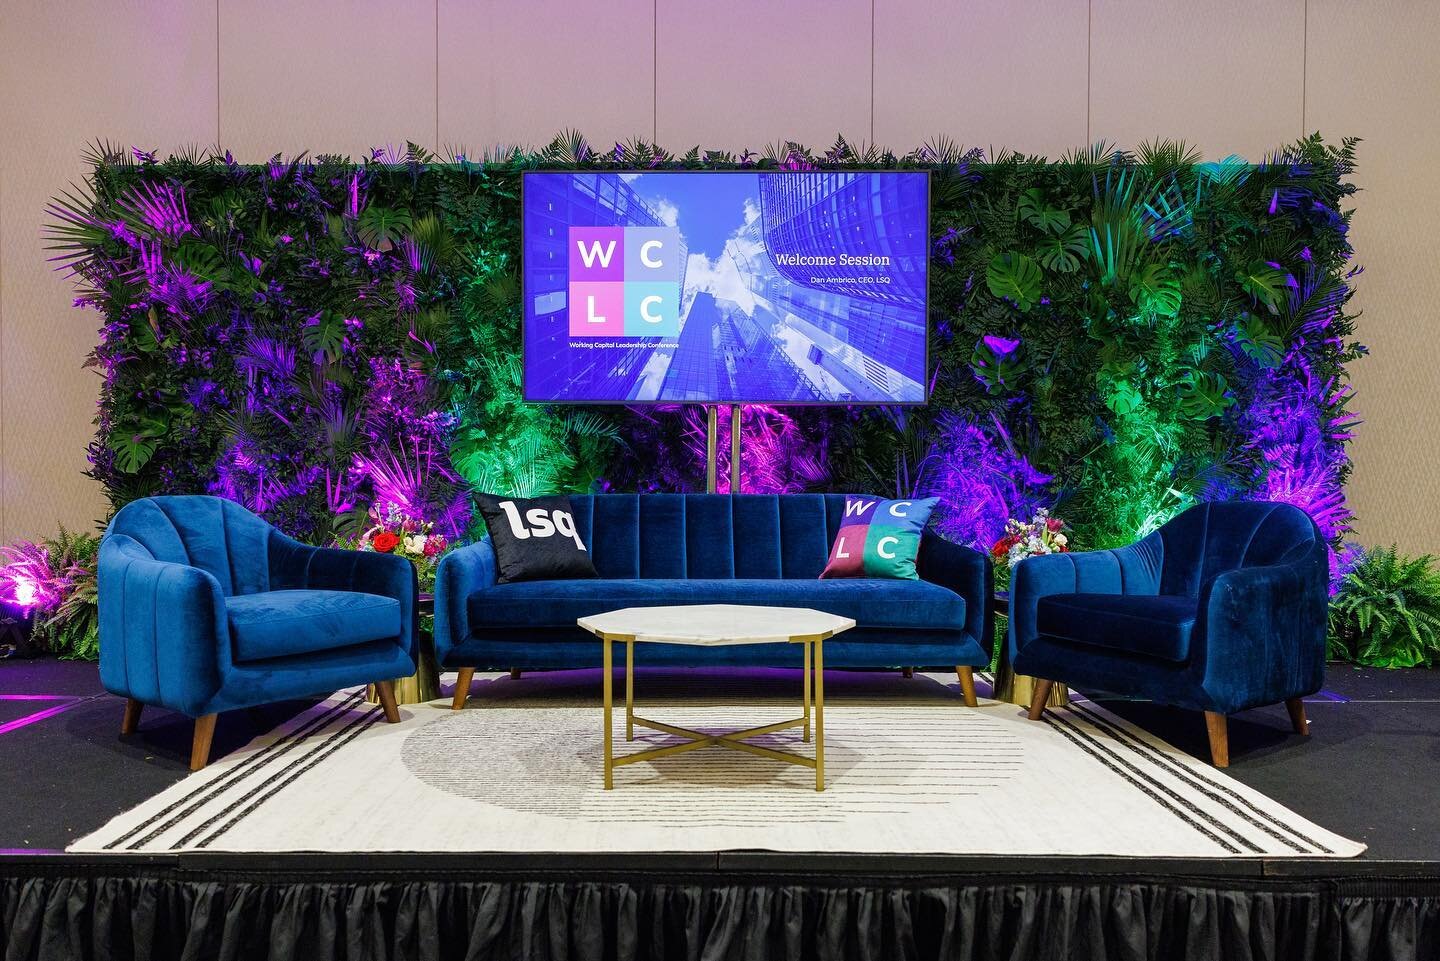 LSQ wanted to make a splash for their Inaugural Working Capital Leadership Conference...and they truly did just that! 

Throughout the event they incorporated consistent branding, great panel discussions with industry thought leaders and several fun 